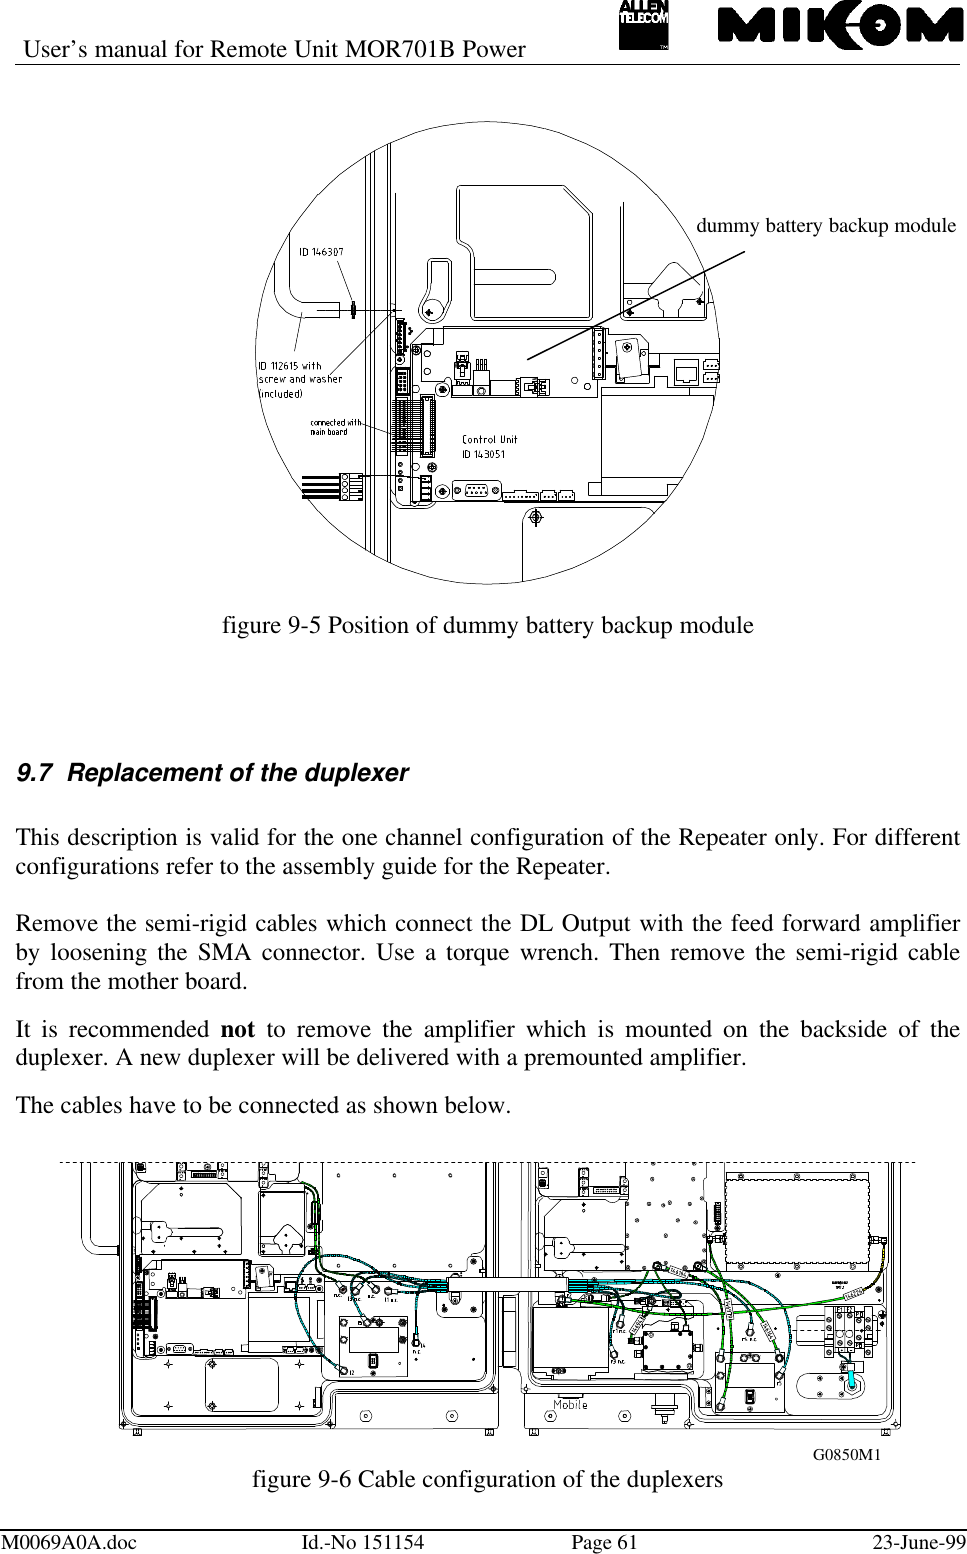 User’s manual for Remote Unit MOR701B PowerM0069A0A.doc Id.-No 151154 Page 61 23-June-99figure 9-5 Position of dummy battery backup module9.7 Replacement of the duplexerThis description is valid for the one channel configuration of the Repeater only. For differentconfigurations refer to the assembly guide for the Repeater.Remove the semi-rigid cables which connect the DL Output with the feed forward amplifierby loosening the SMA connector. Use a torque wrench. Then remove the semi-rigid cablefrom the mother board.It is recommended not to remove the amplifier which is mounted on the backside of theduplexer. A new duplexer will be delivered with a premounted amplifier.The cables have to be connected as shown below.figure 9-6 Cable configuration of the duplexersdummy battery backup moduleG0850M1